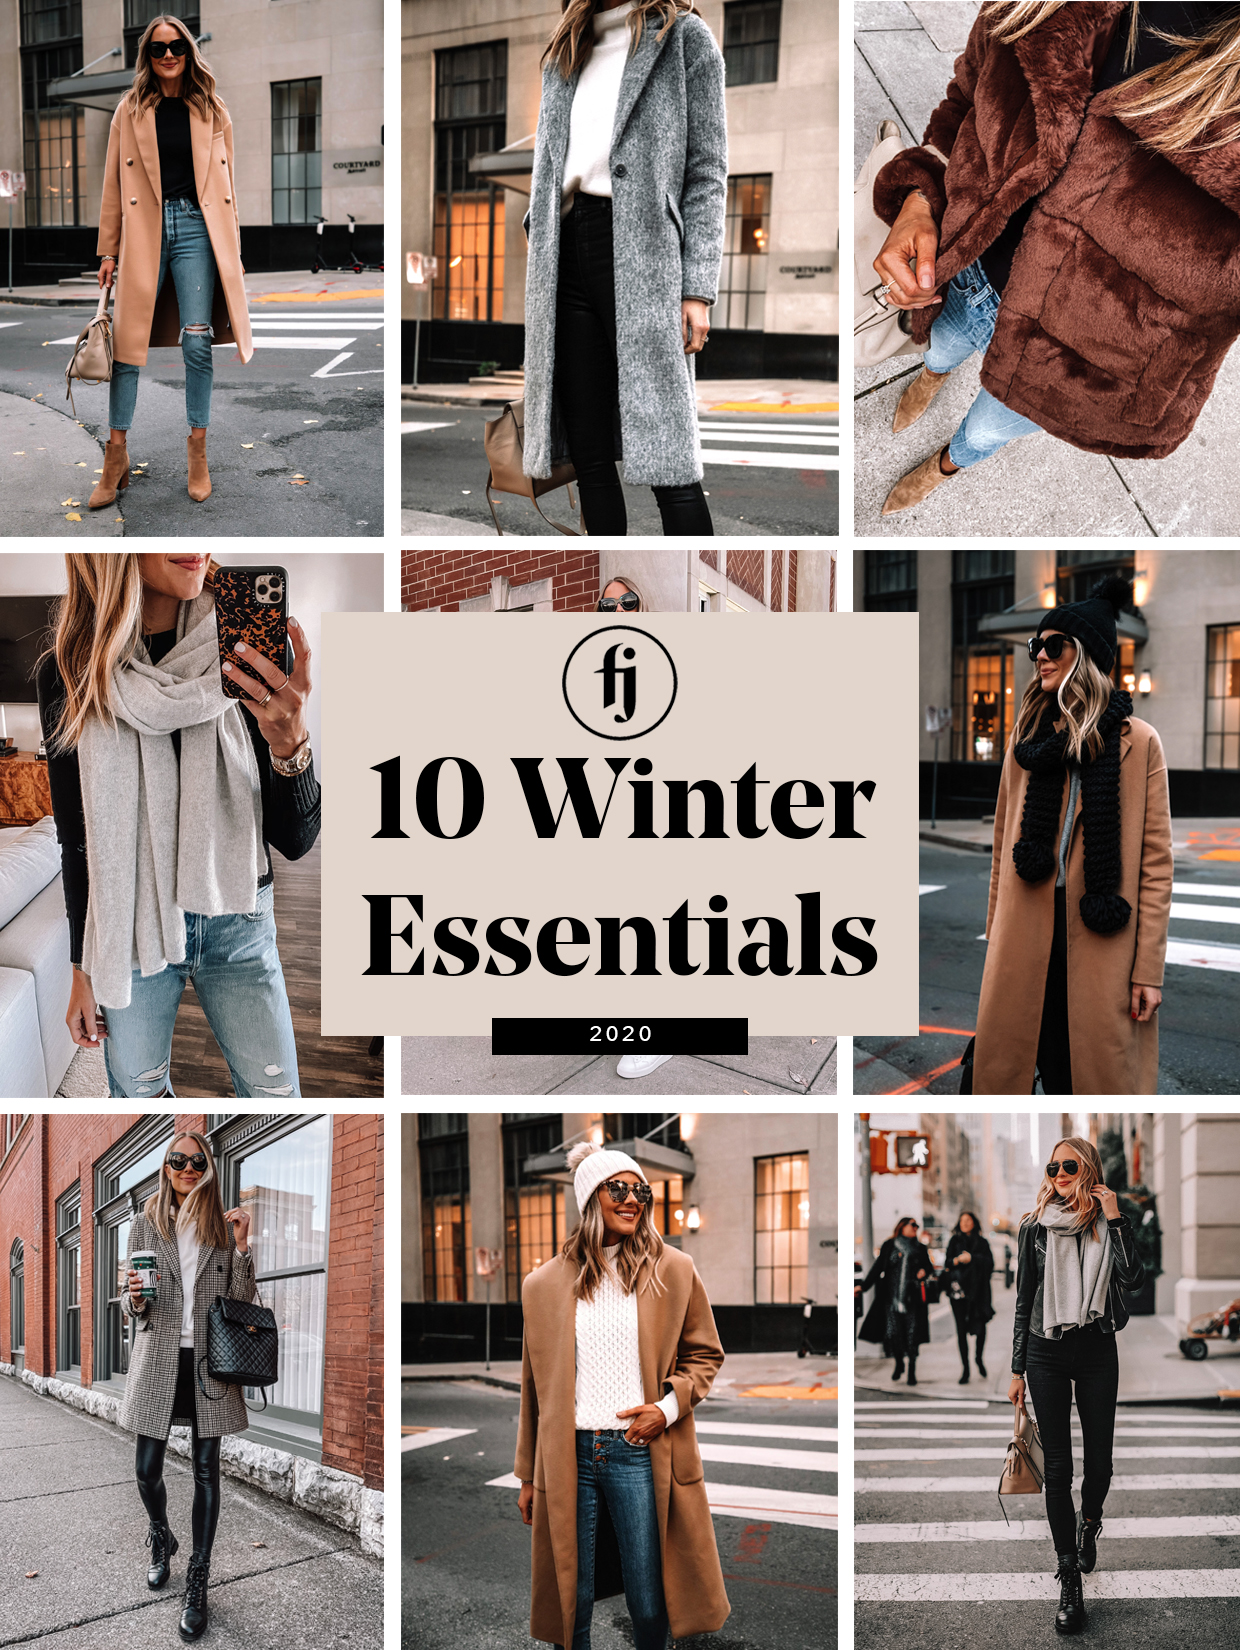 7 Cozy Winter Outfits You Can Wear to the Office and Beyond